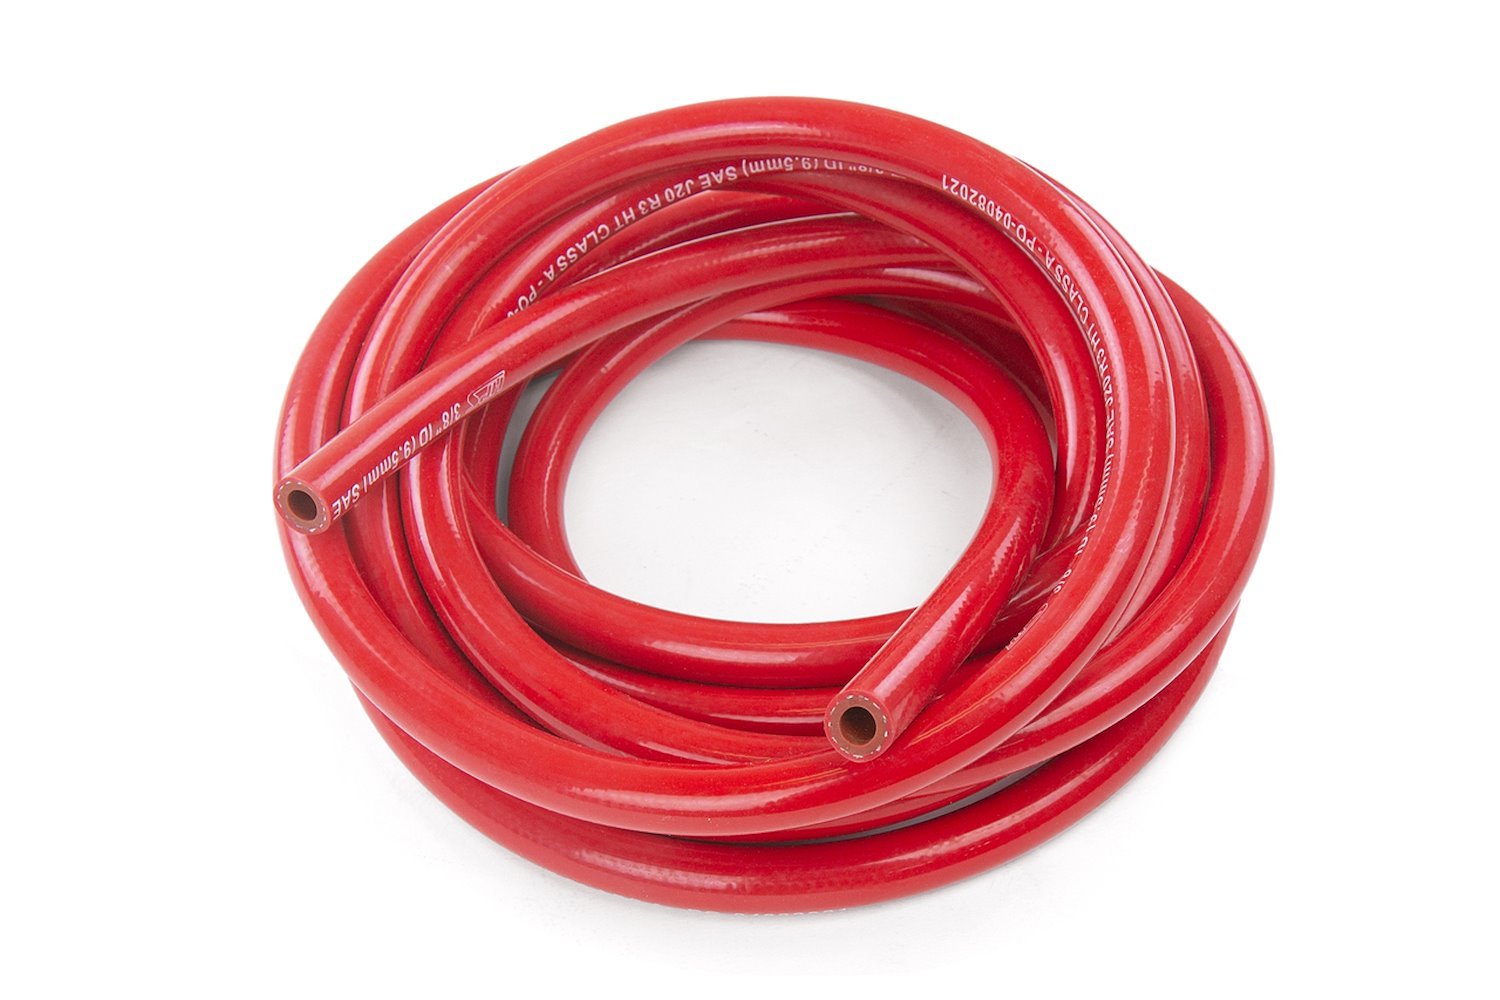 HTHH-050-REDx25 Silicone Heater Hose Tubing, High-Temp 1-Ply Reinforced, 1/2 in. ID, 25 ft. Roll, Red